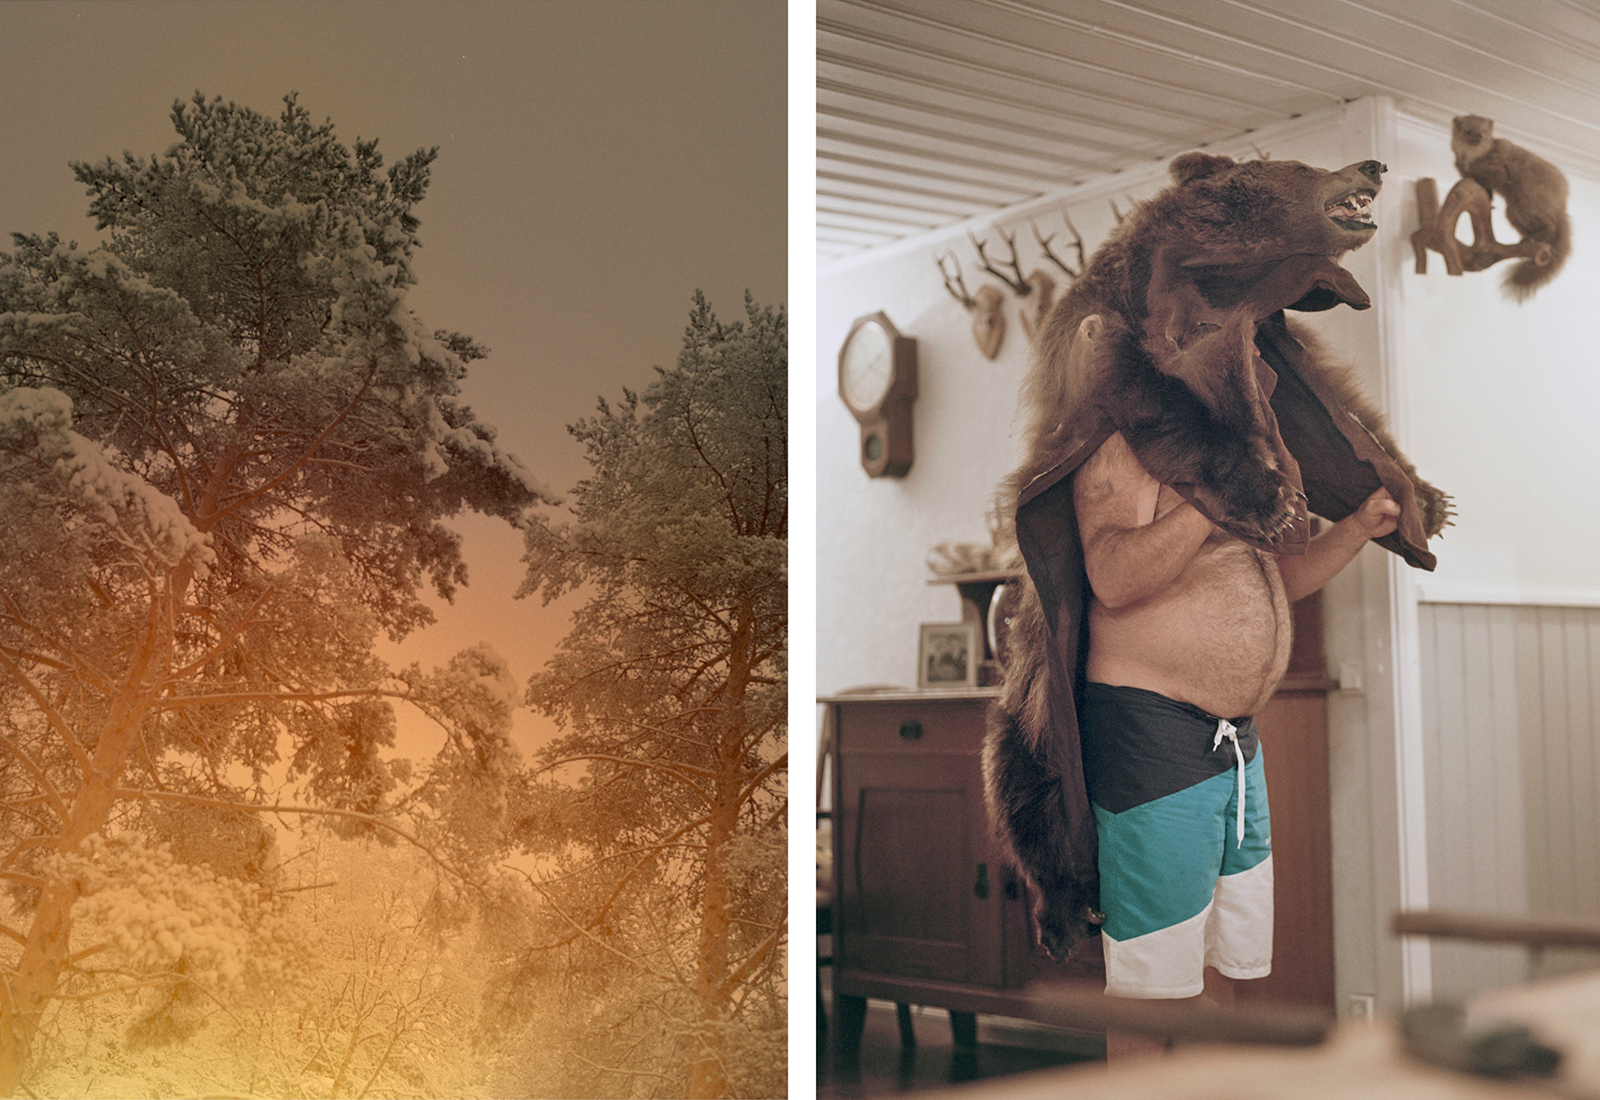 Two photos by Maja Daniels. On the left side, a three on fire and on the right side a man with a bear fur on his head.